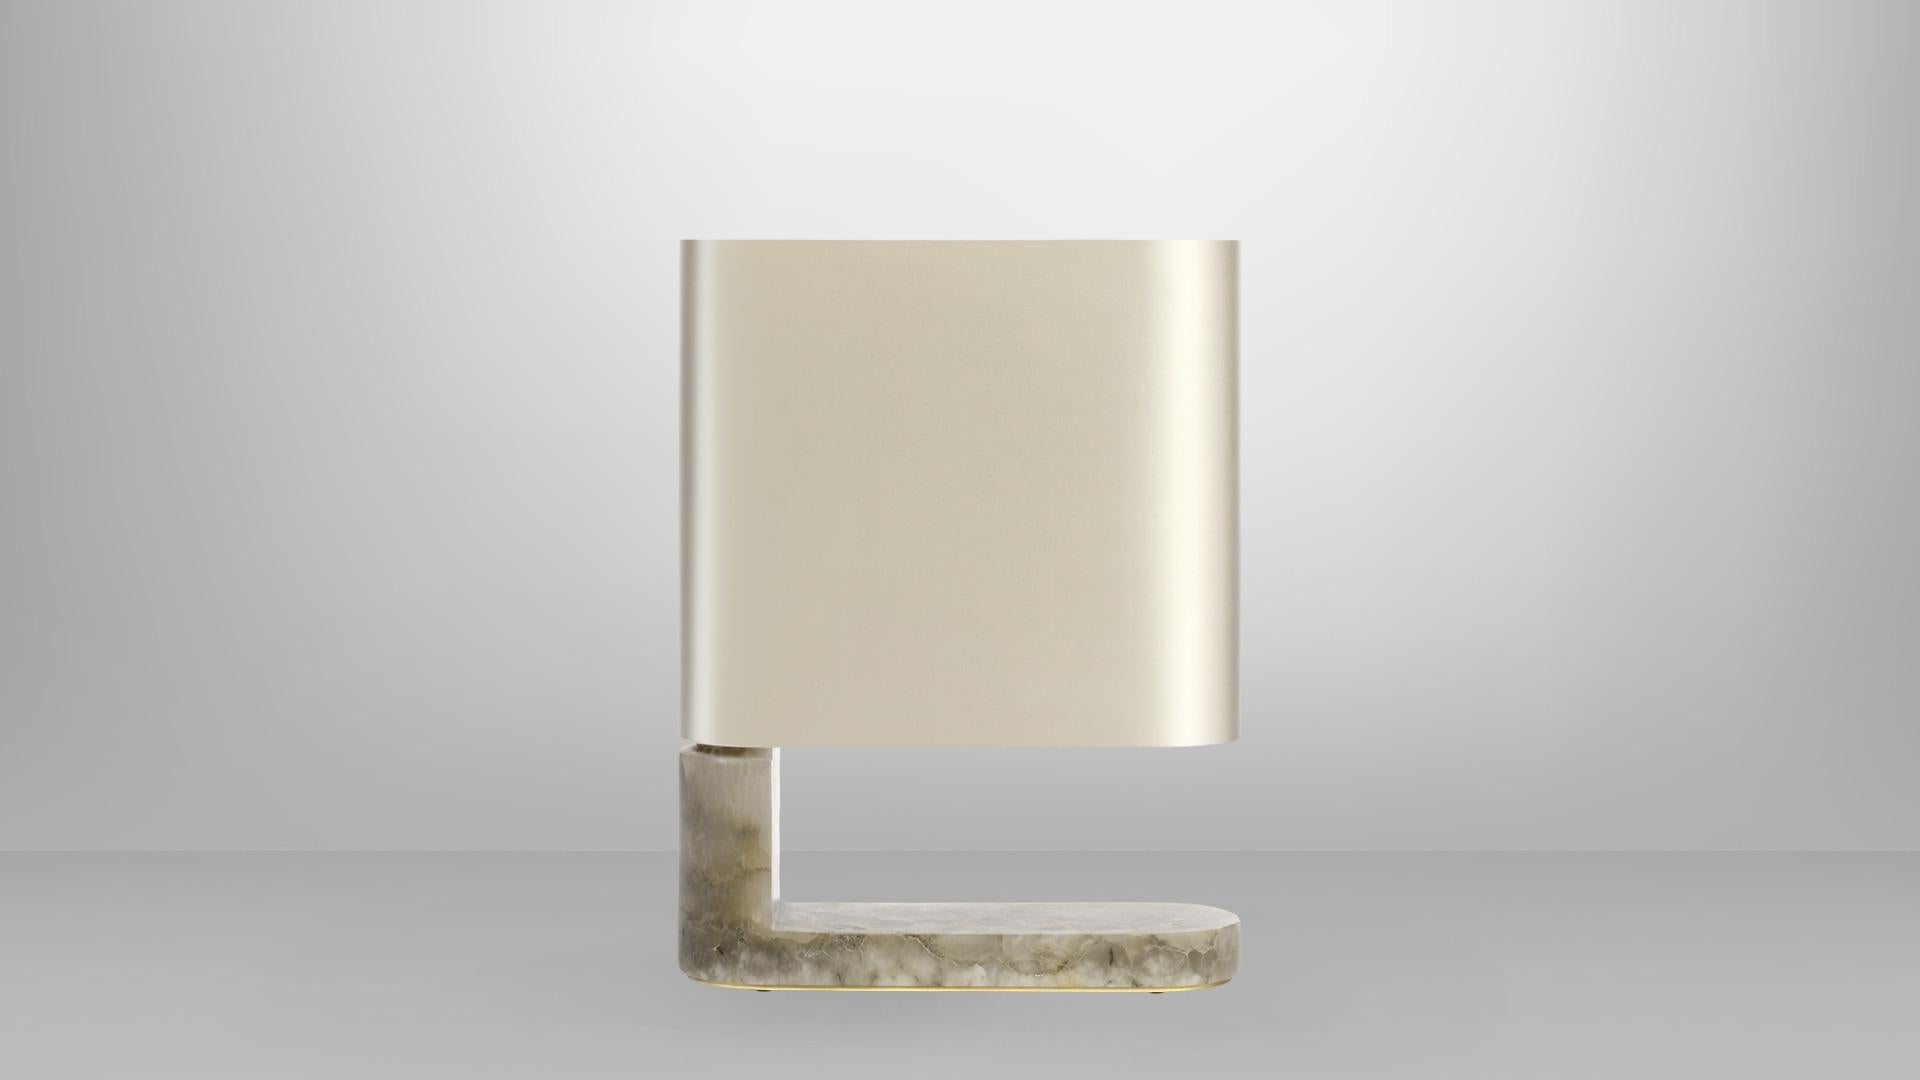 Alabaster Columbo table lamp by CTO Lighting
Materials: Grey alabaster with satin brass and dove grey silk shade
Dimensions: 33 x H 43.5 cm

All our lamps can be wired according to each country. If sold to the USA it will be wired for the USA for